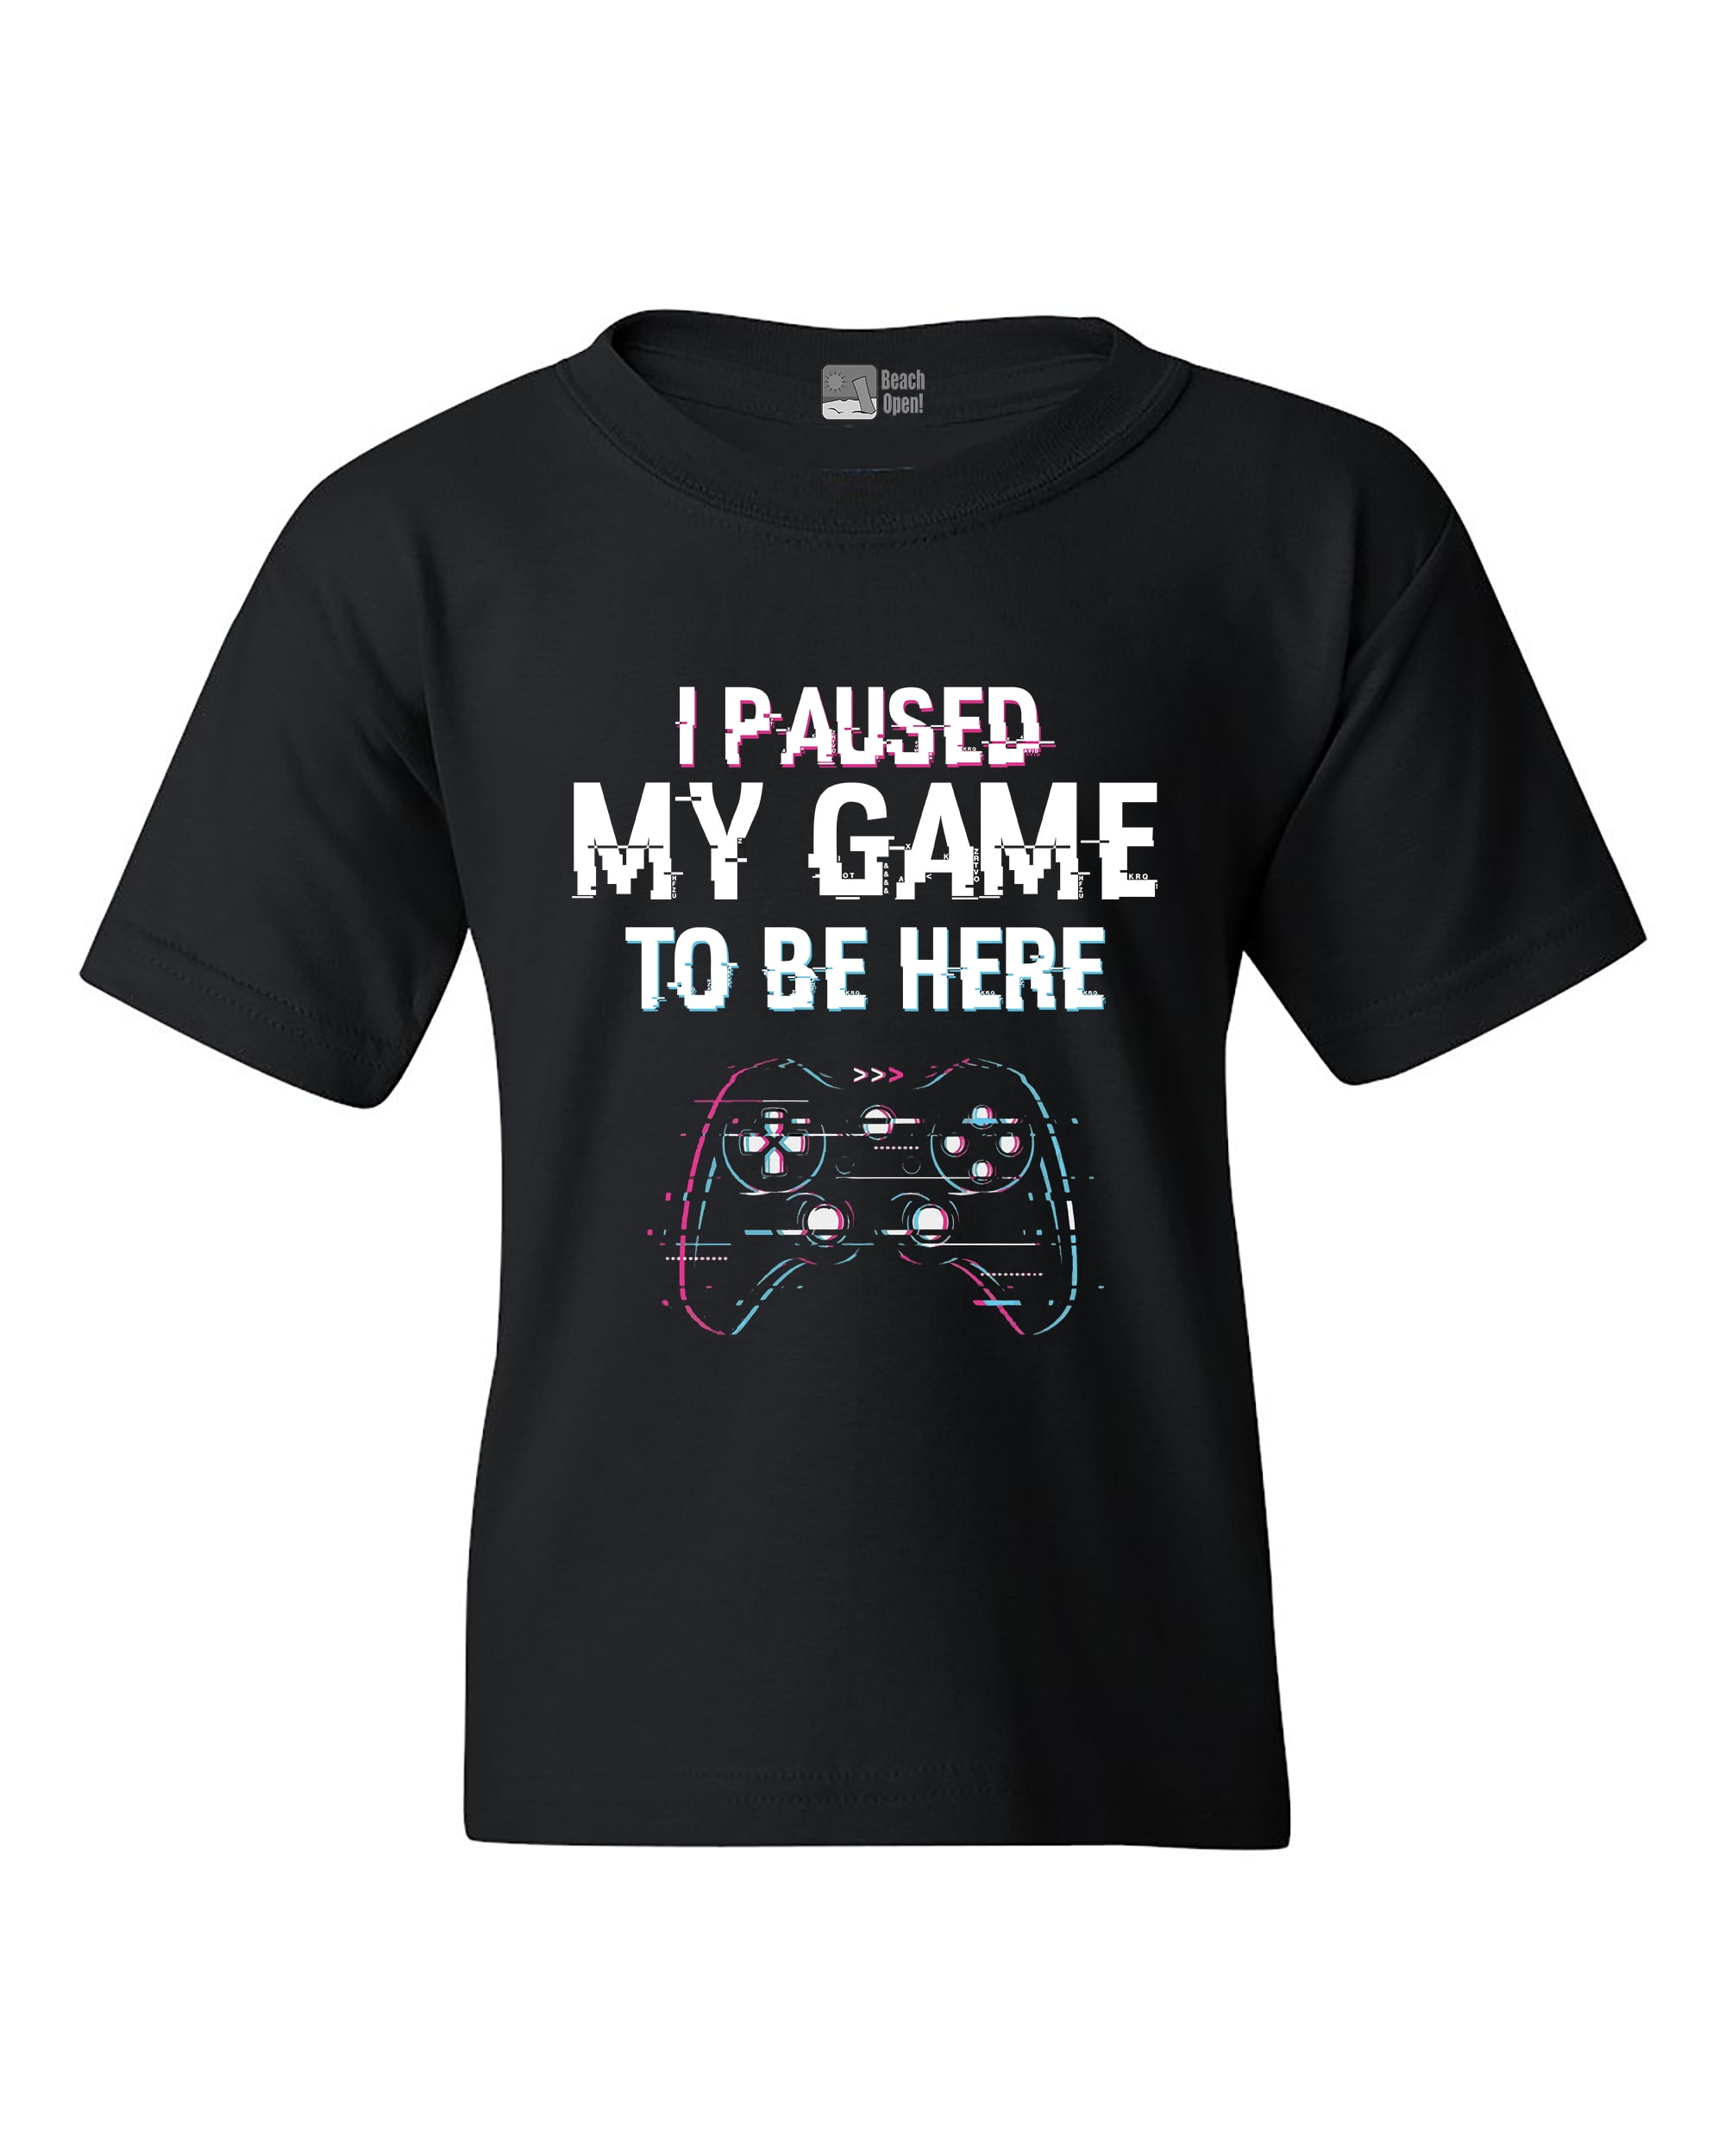 Youth I Paused My Game to be Here Kids graphic Tees Funny Graphic Tees for kids